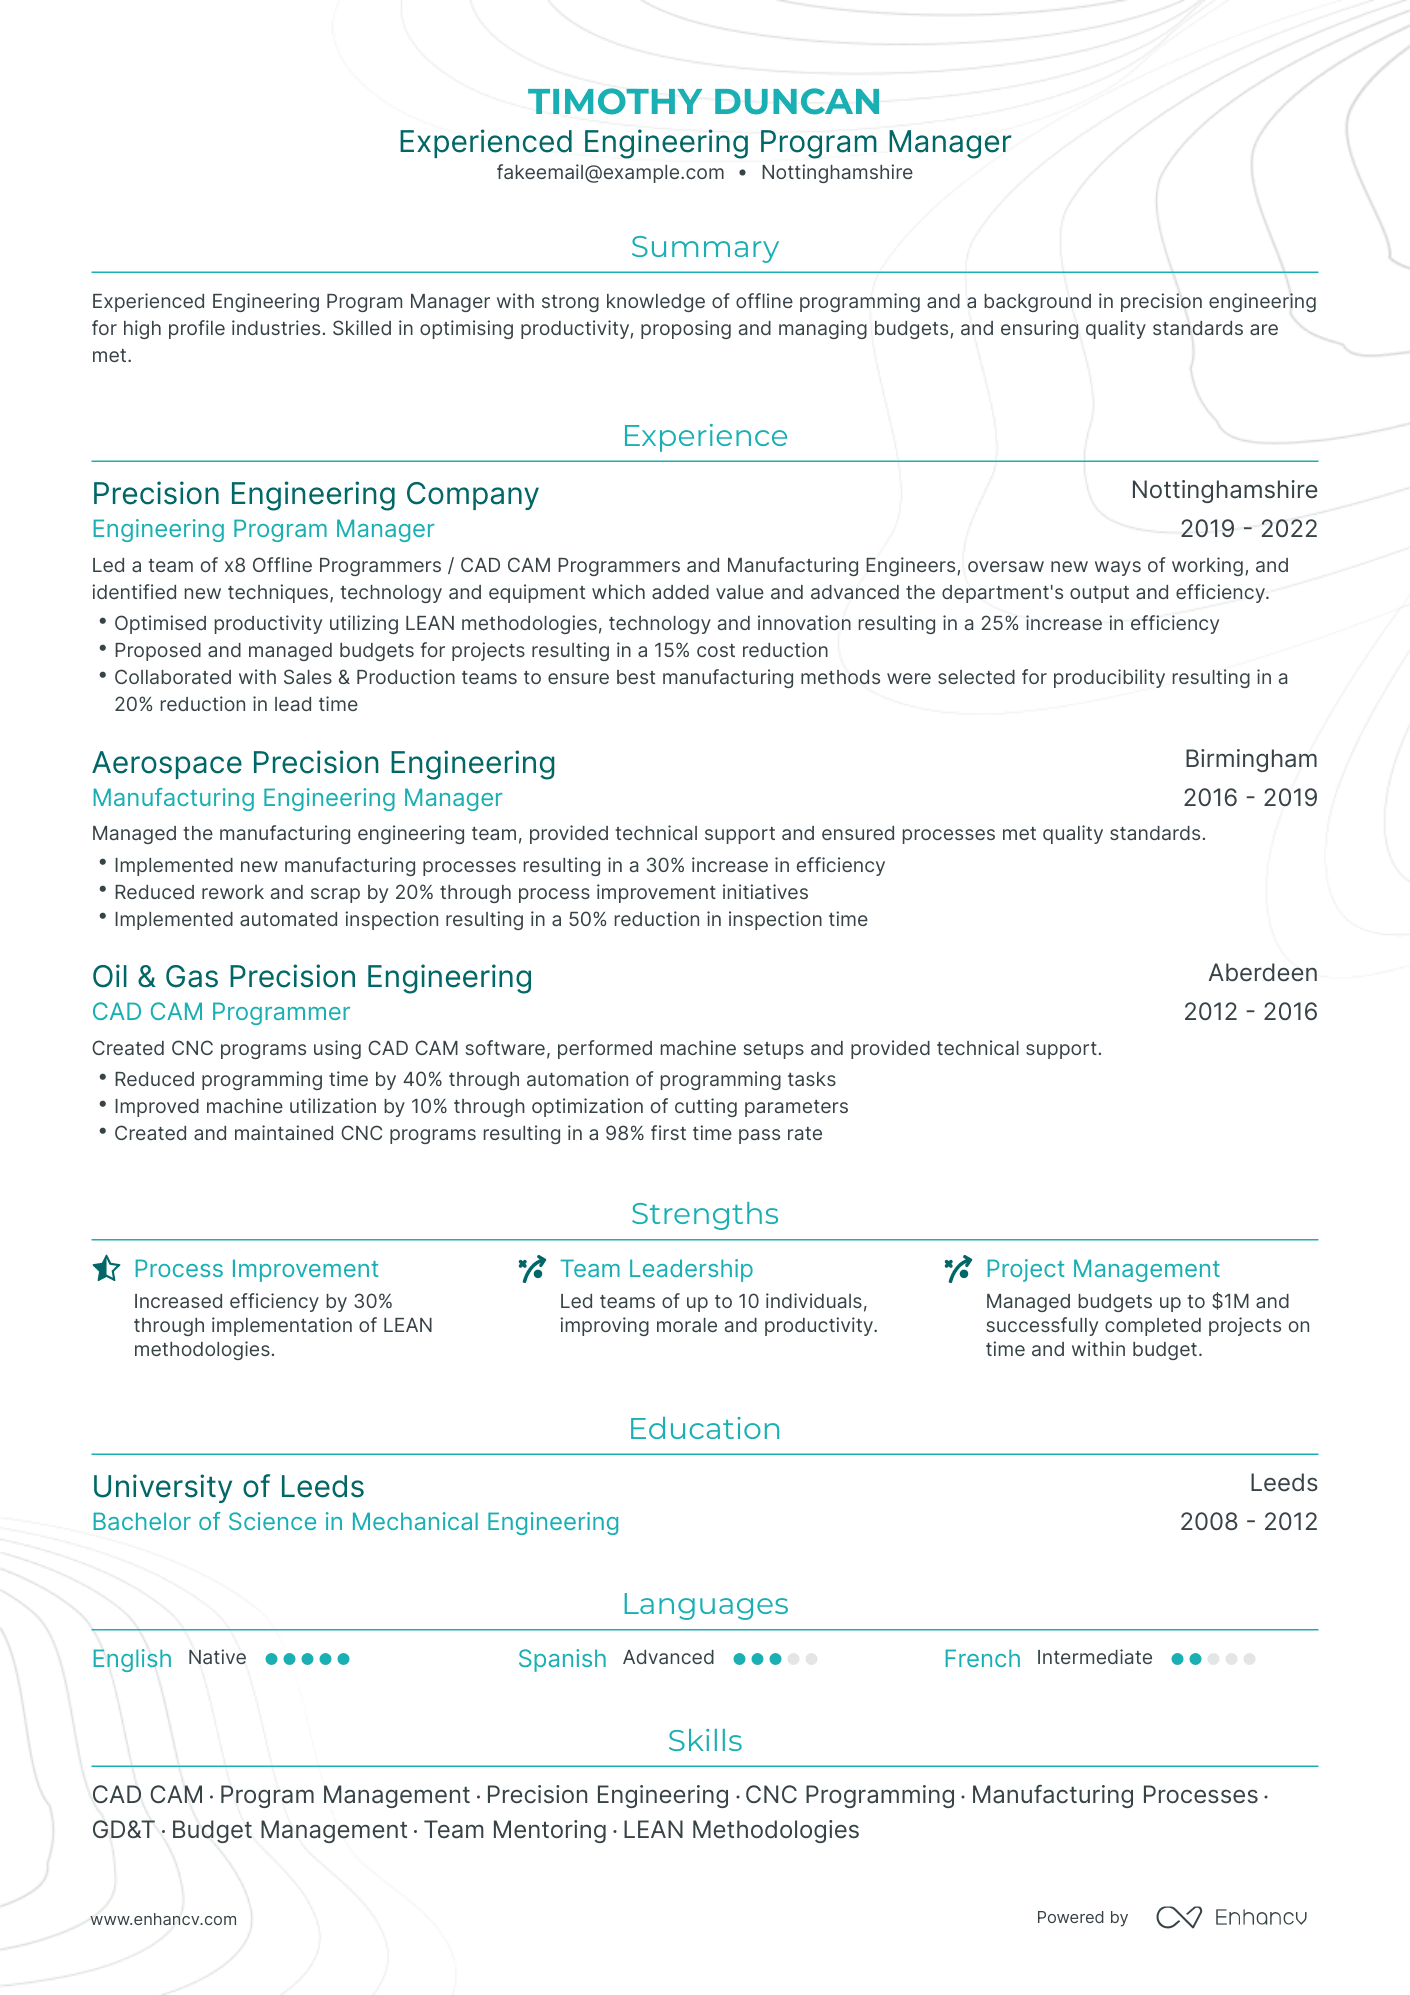 Traditional Engineering Program Manager Resume Template